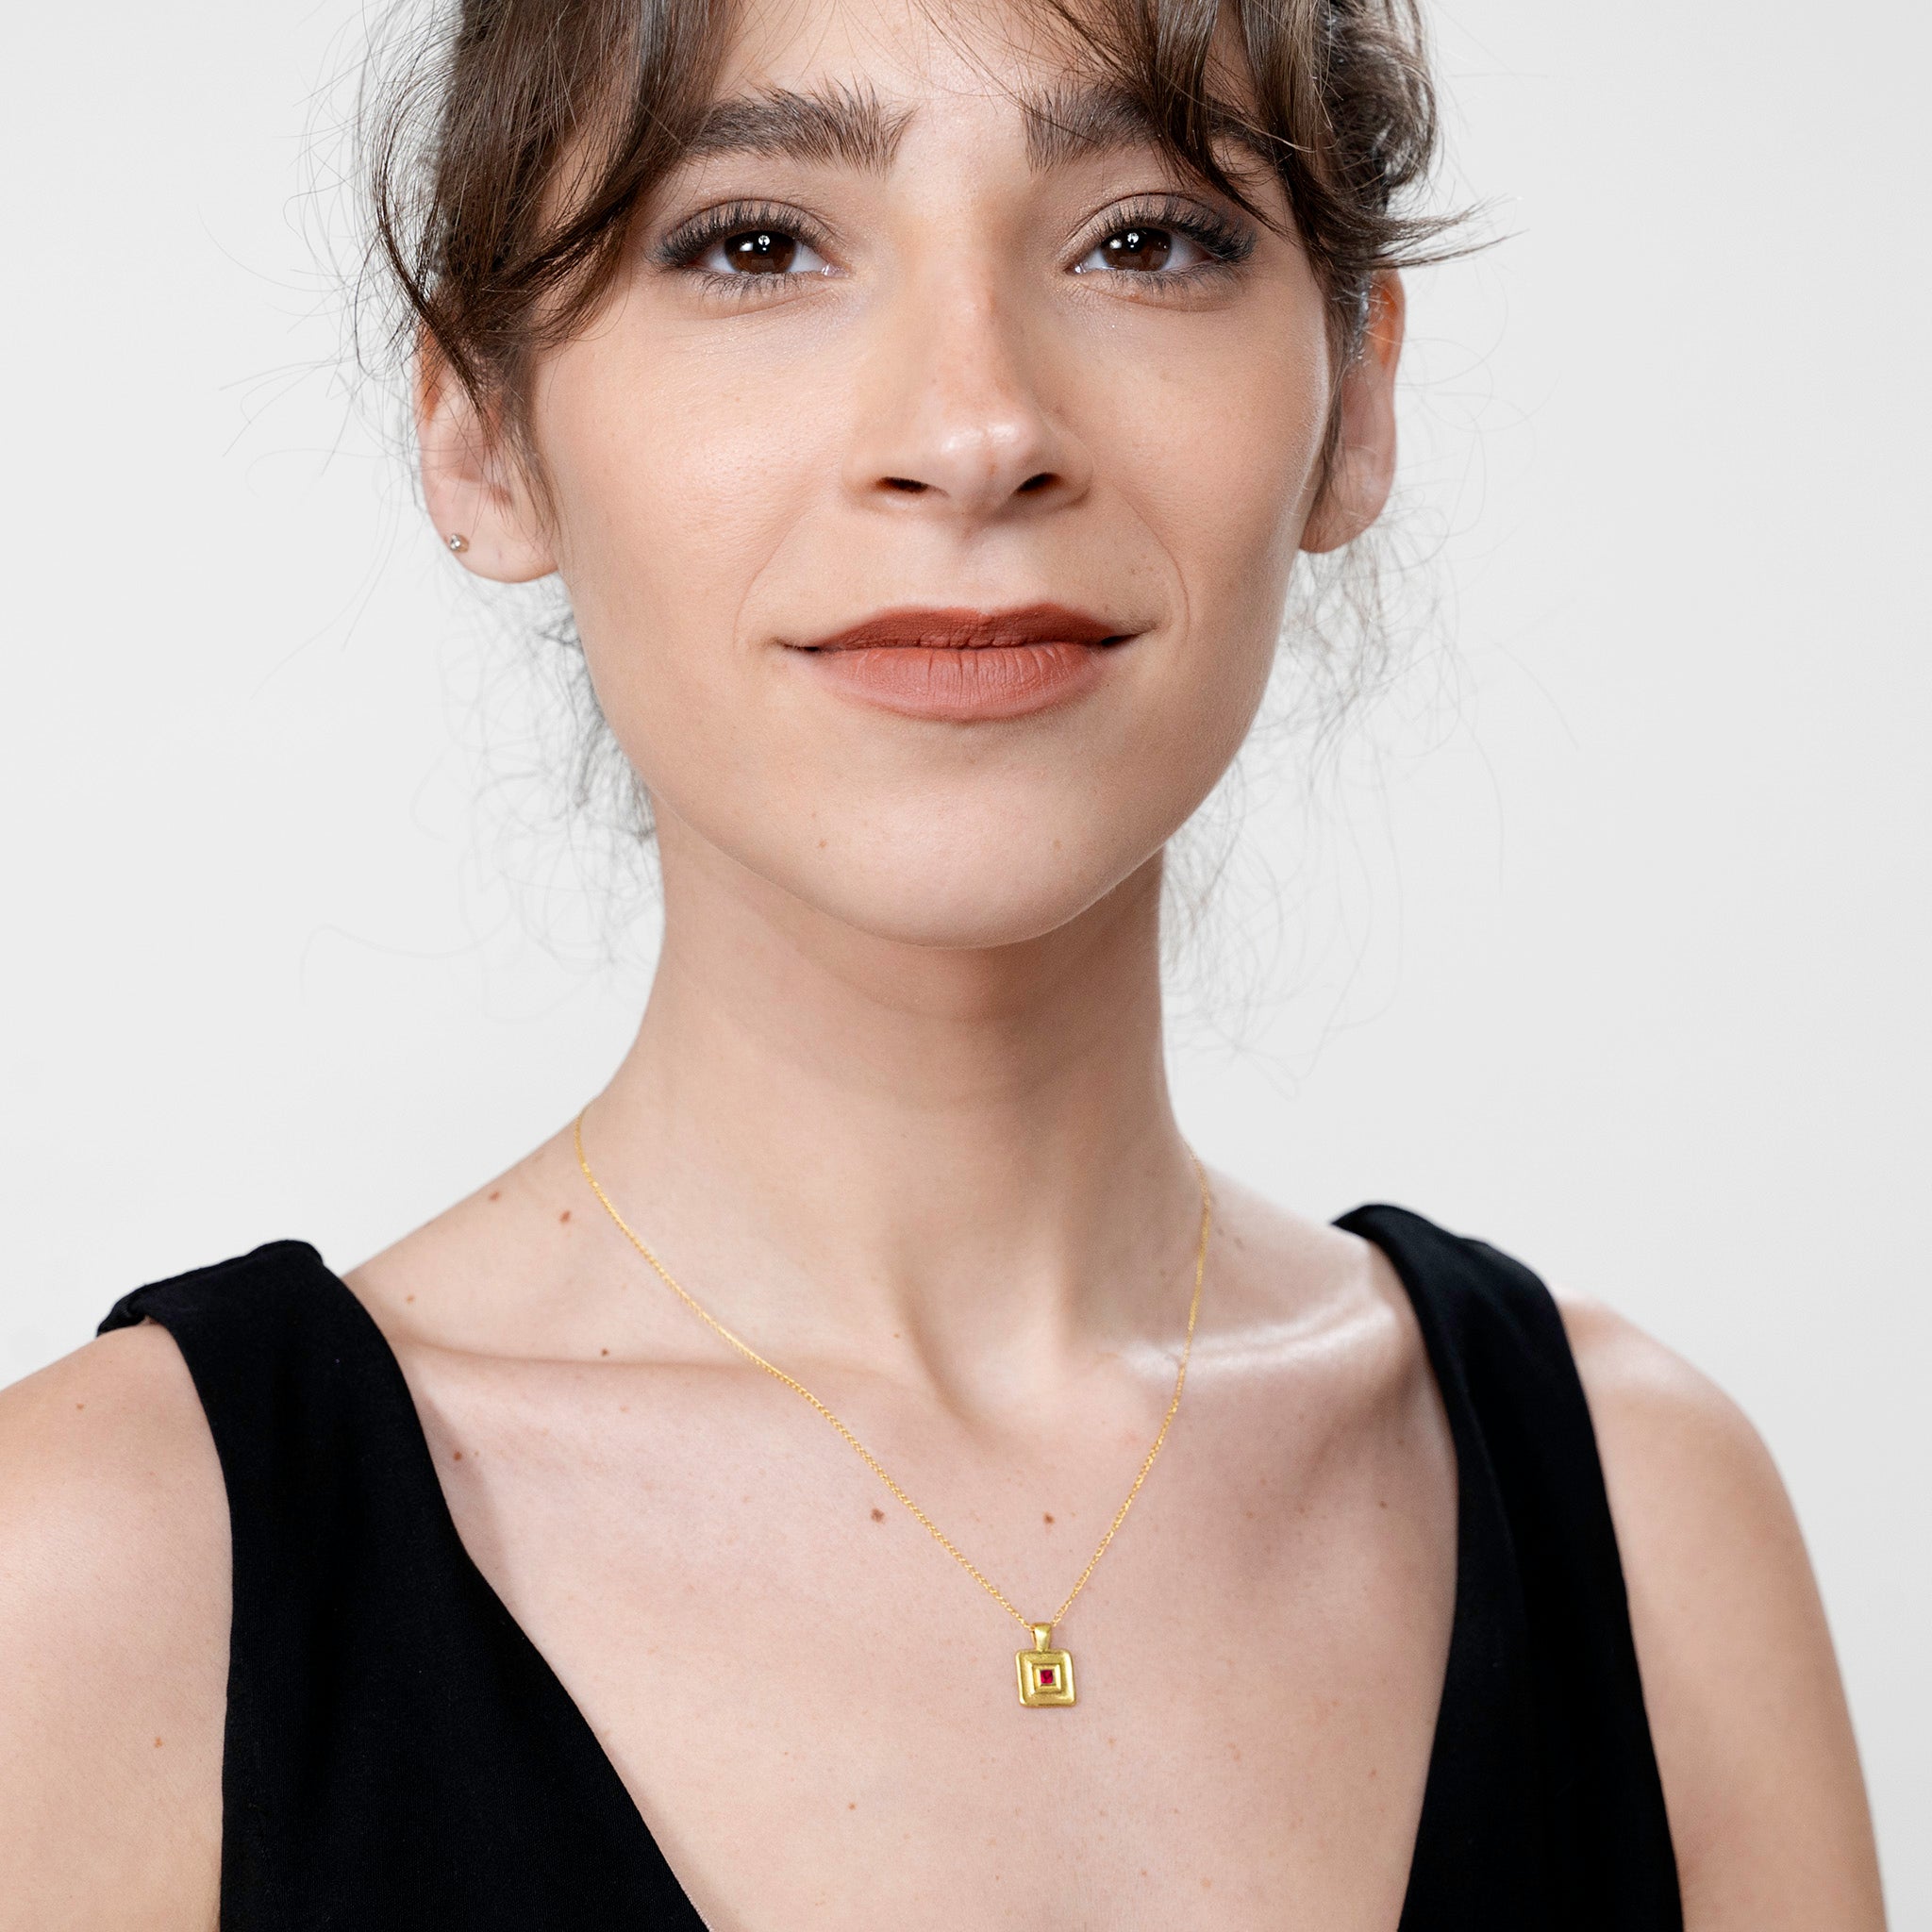 Model showcases the Pharaohs II handmade square gold pendant, centered with a square Ruby gemstone, a piece inspired by the regal adornments of Egypt's ancient rulers.